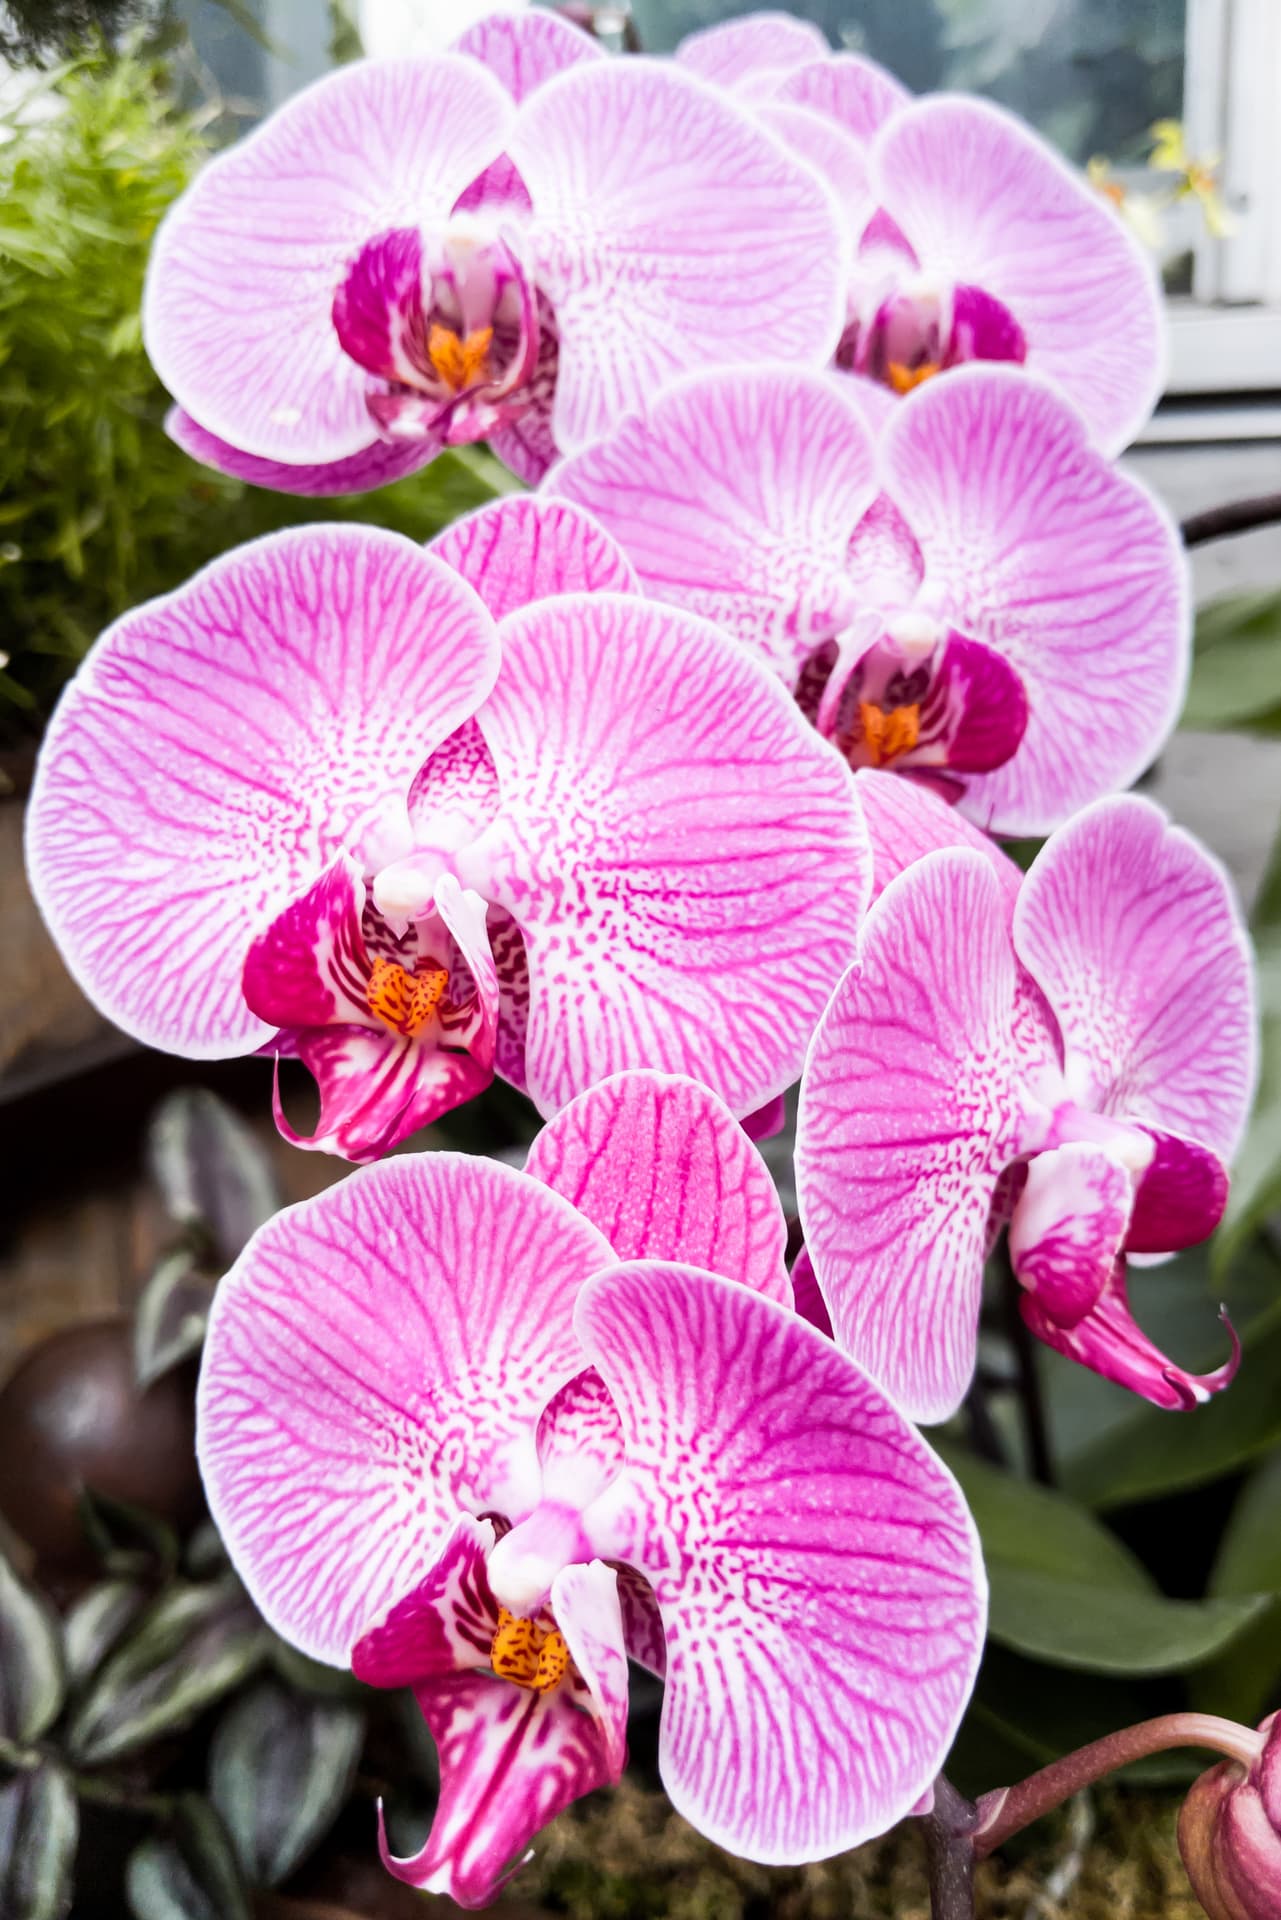 A stem of purple and white orchid flowers, all in full bloom.